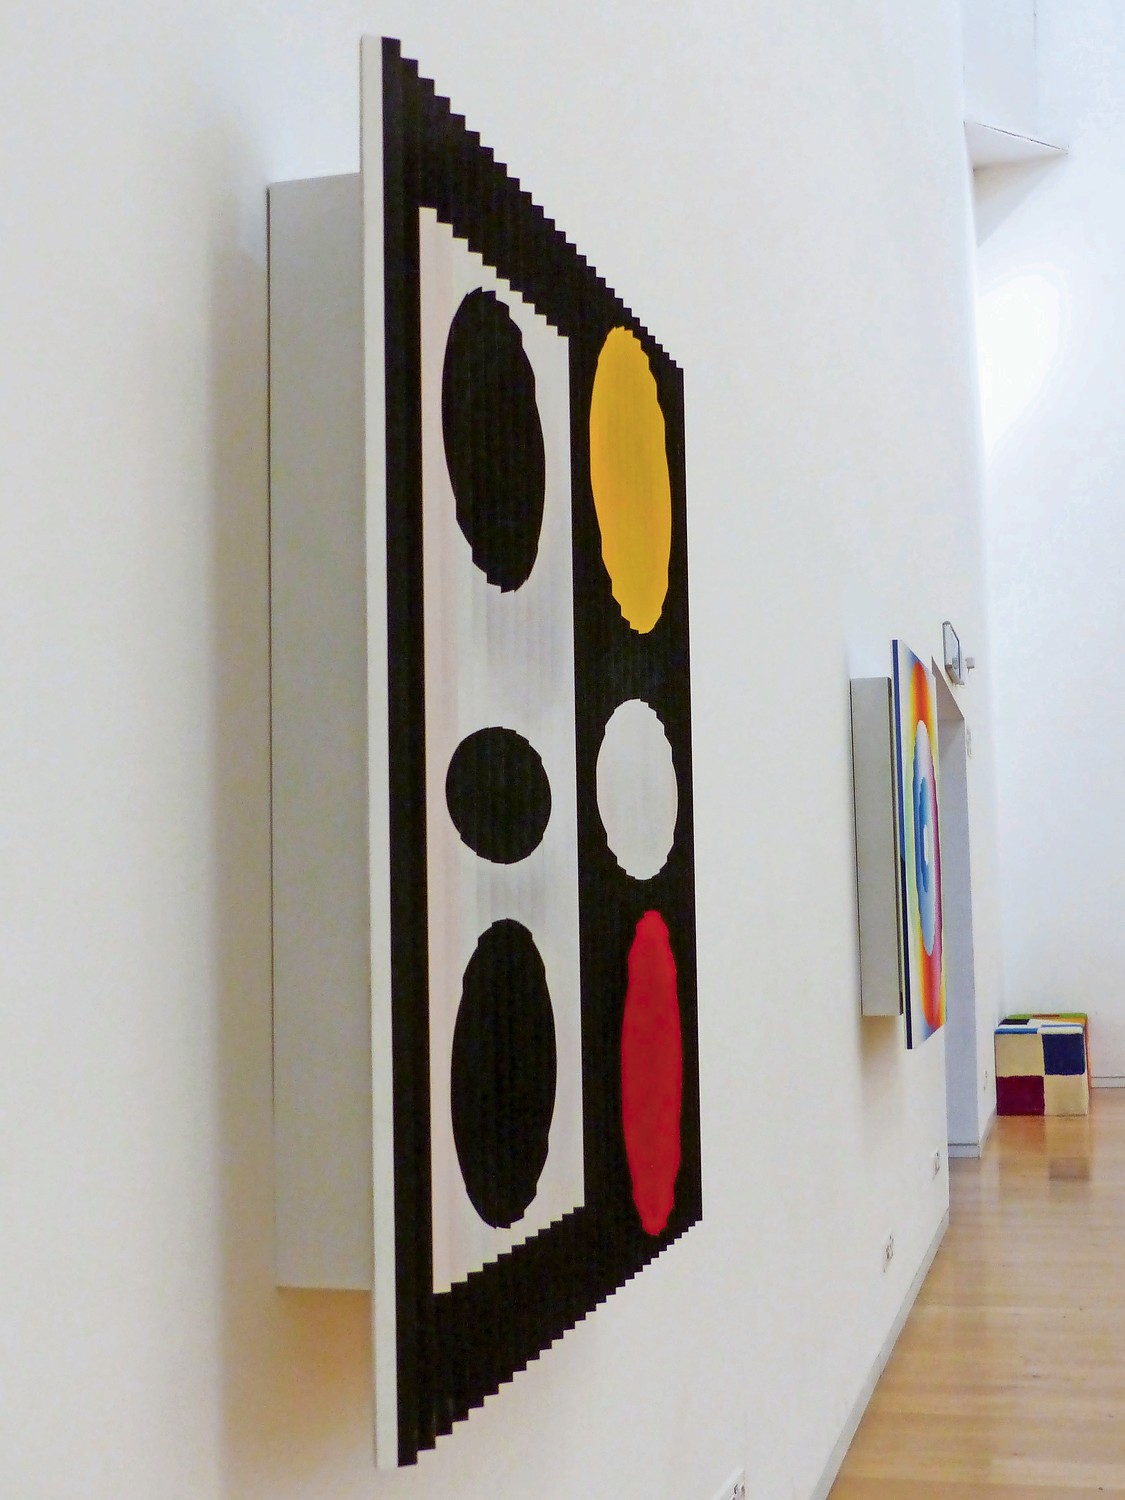 Yaacov Agam is as well known outside of Israel as he is in, and the Agam Museum in Rishon LeZion is a must-stop for those who would love to see his abstract pieces- some of them interactive- up close.